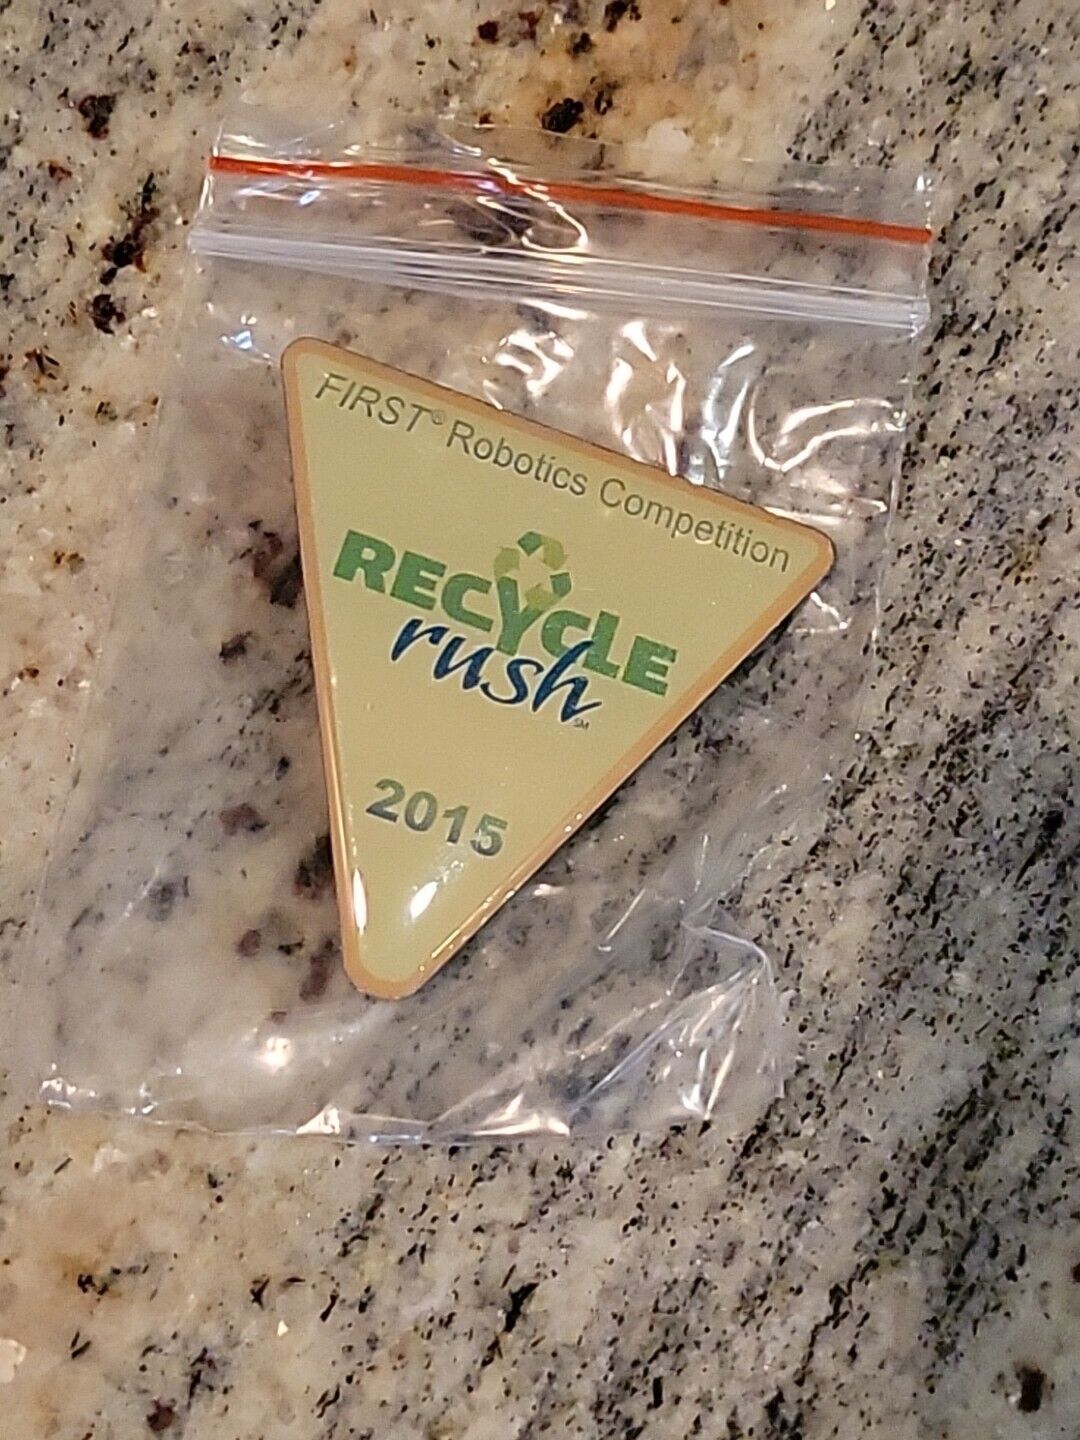 FIRST Robotics Competition (FRC) 2015 Recycle Rush Enamel Pin